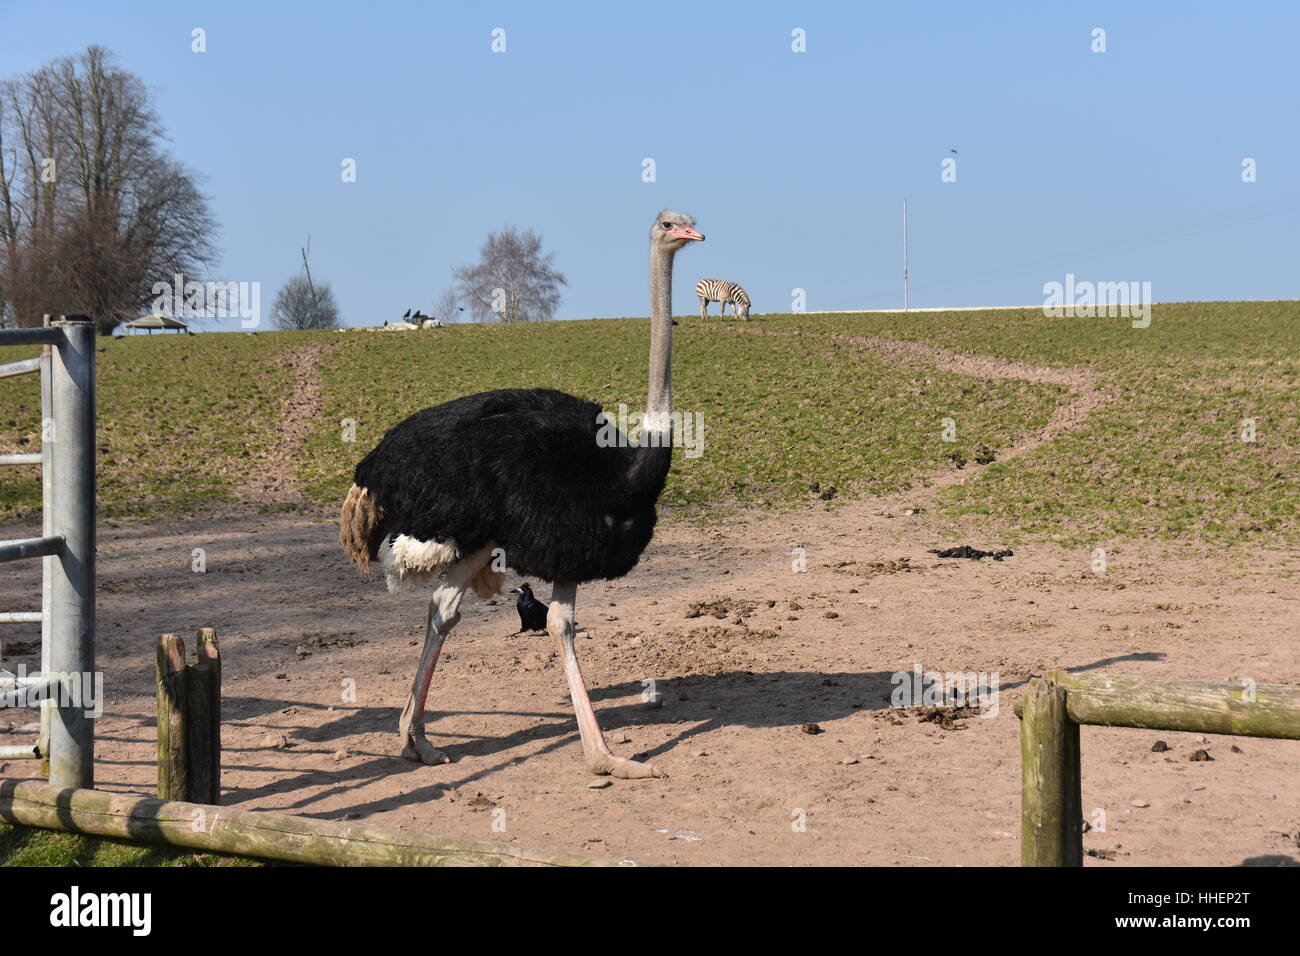 Emu / Ostrich walking in the reserve / park Stock Photo